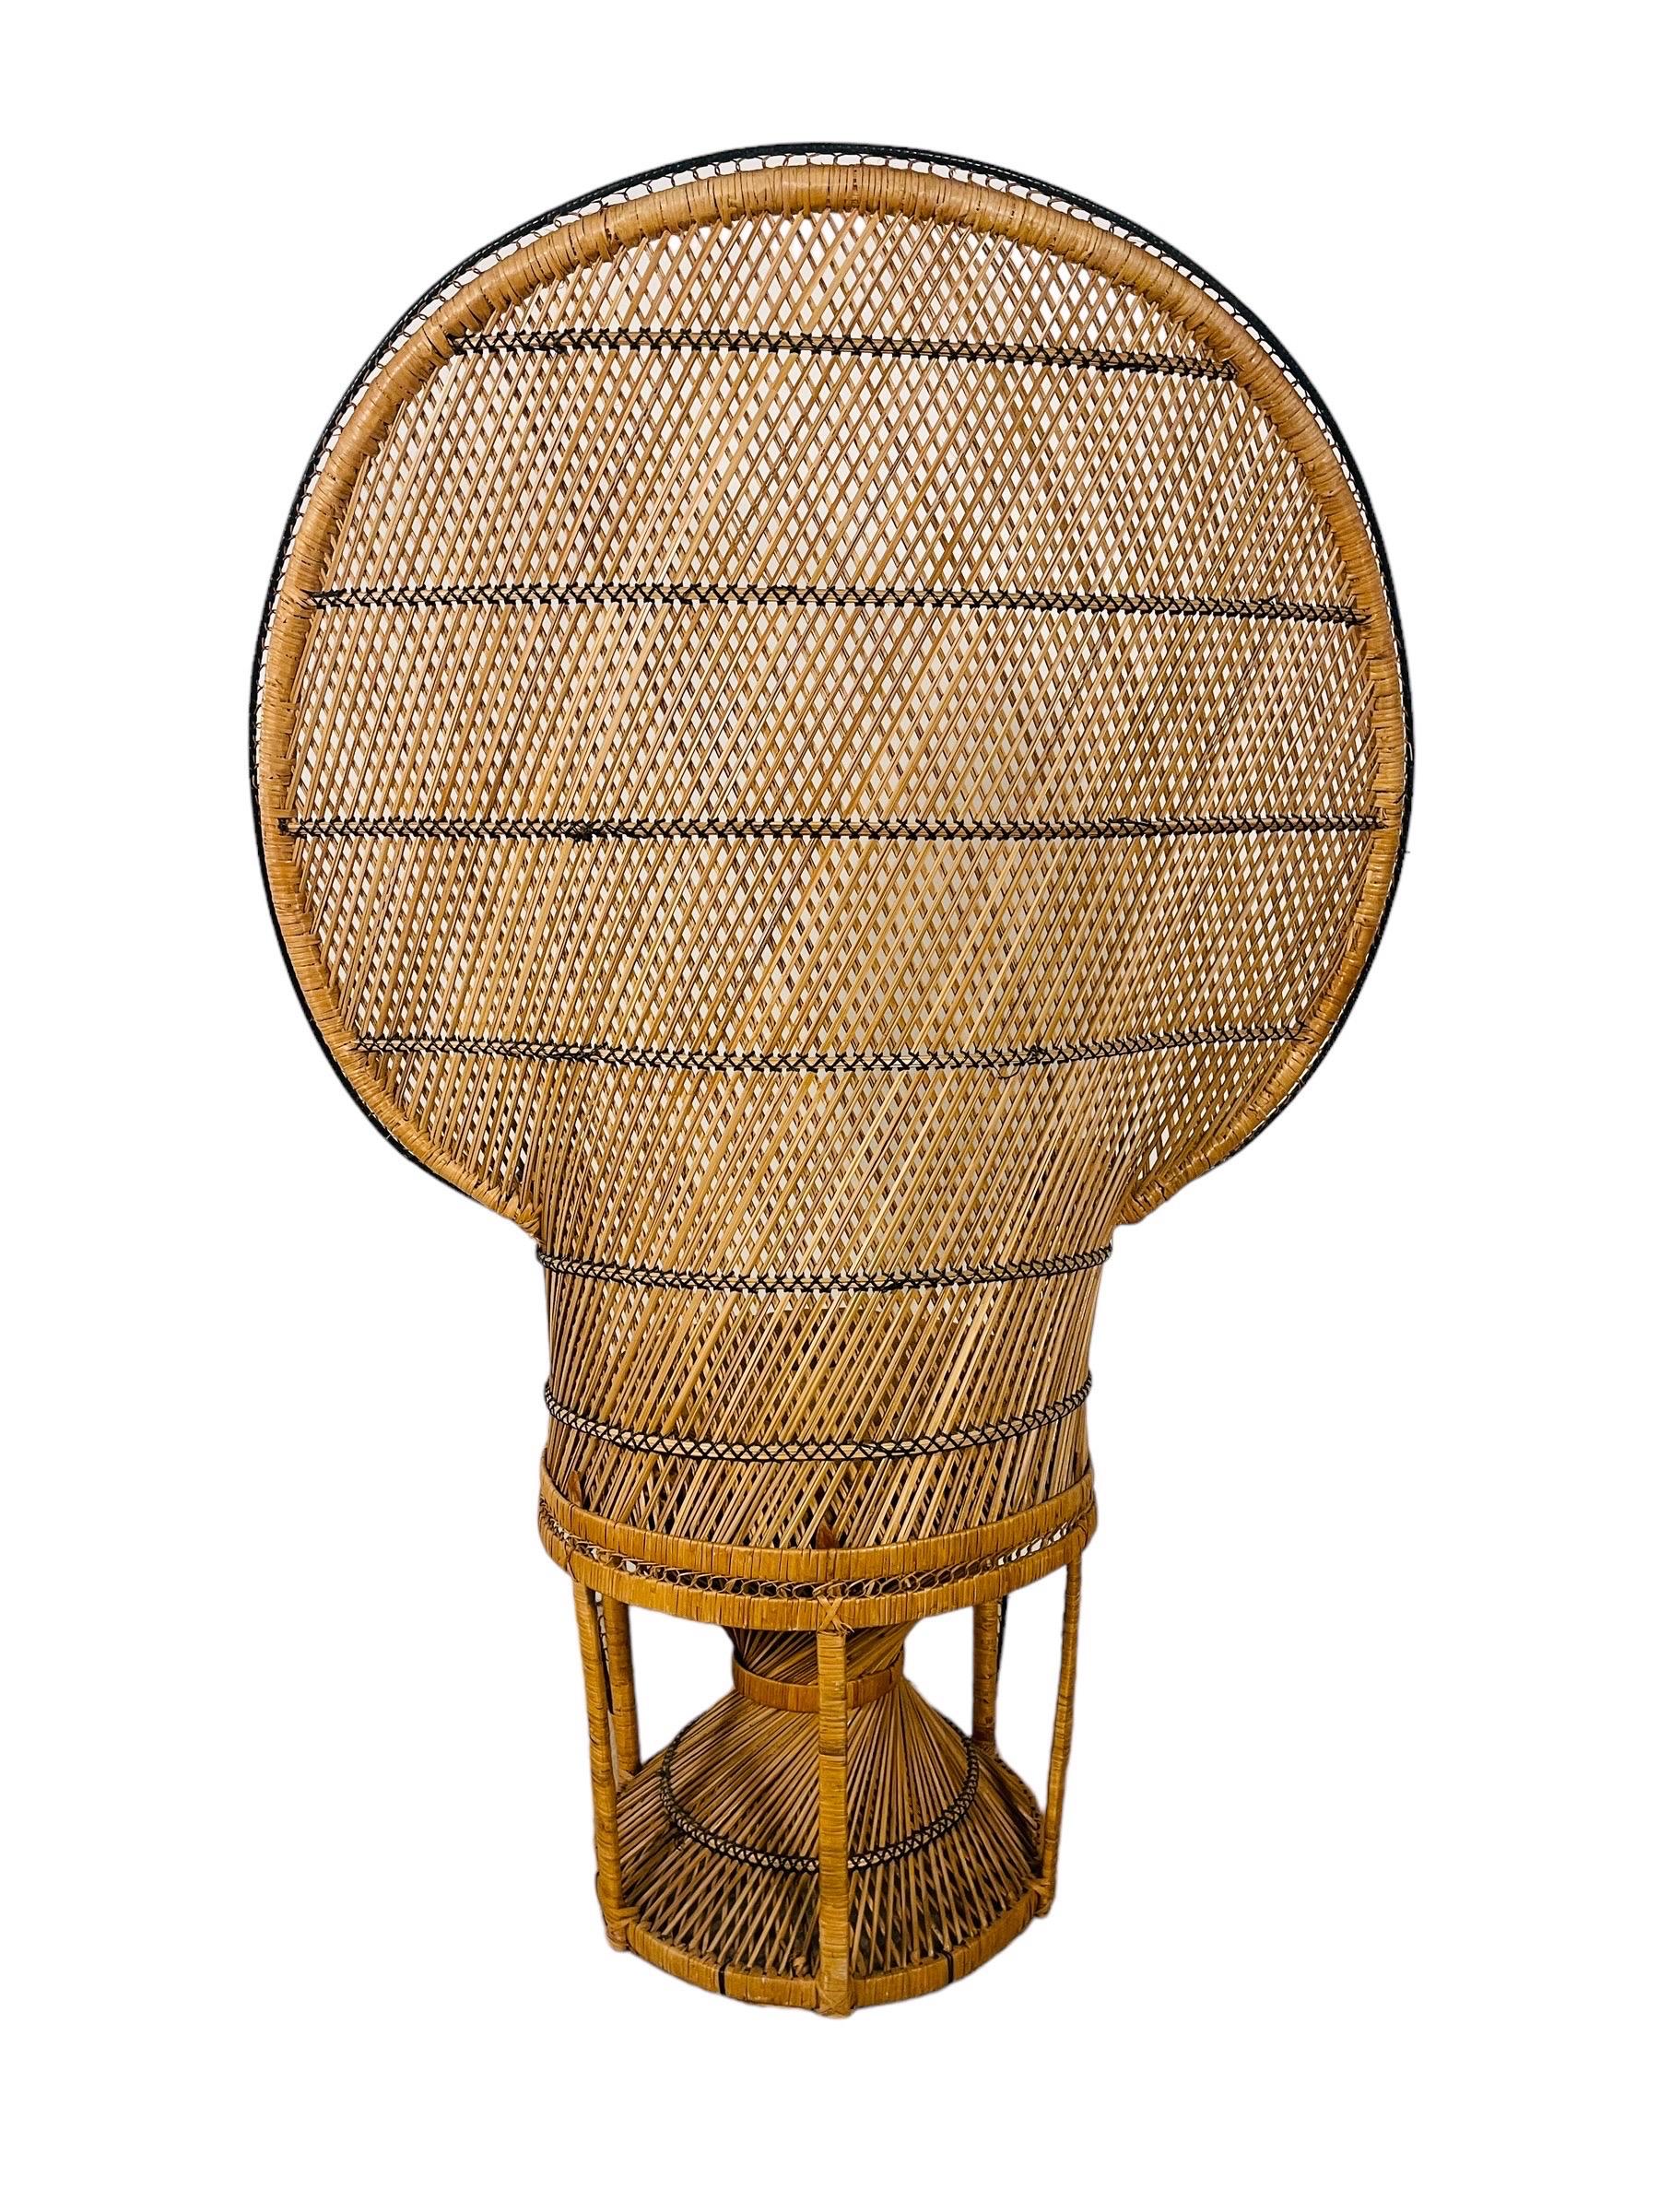 Step into the allure of bohemian charm with this Vintage Boho Chic Wicker Rattan Peacock Chair. In its majestic presence, this chair stands 59 inches tall with a generous 41-inch wing span, creating an impressive silhouette that's as much a